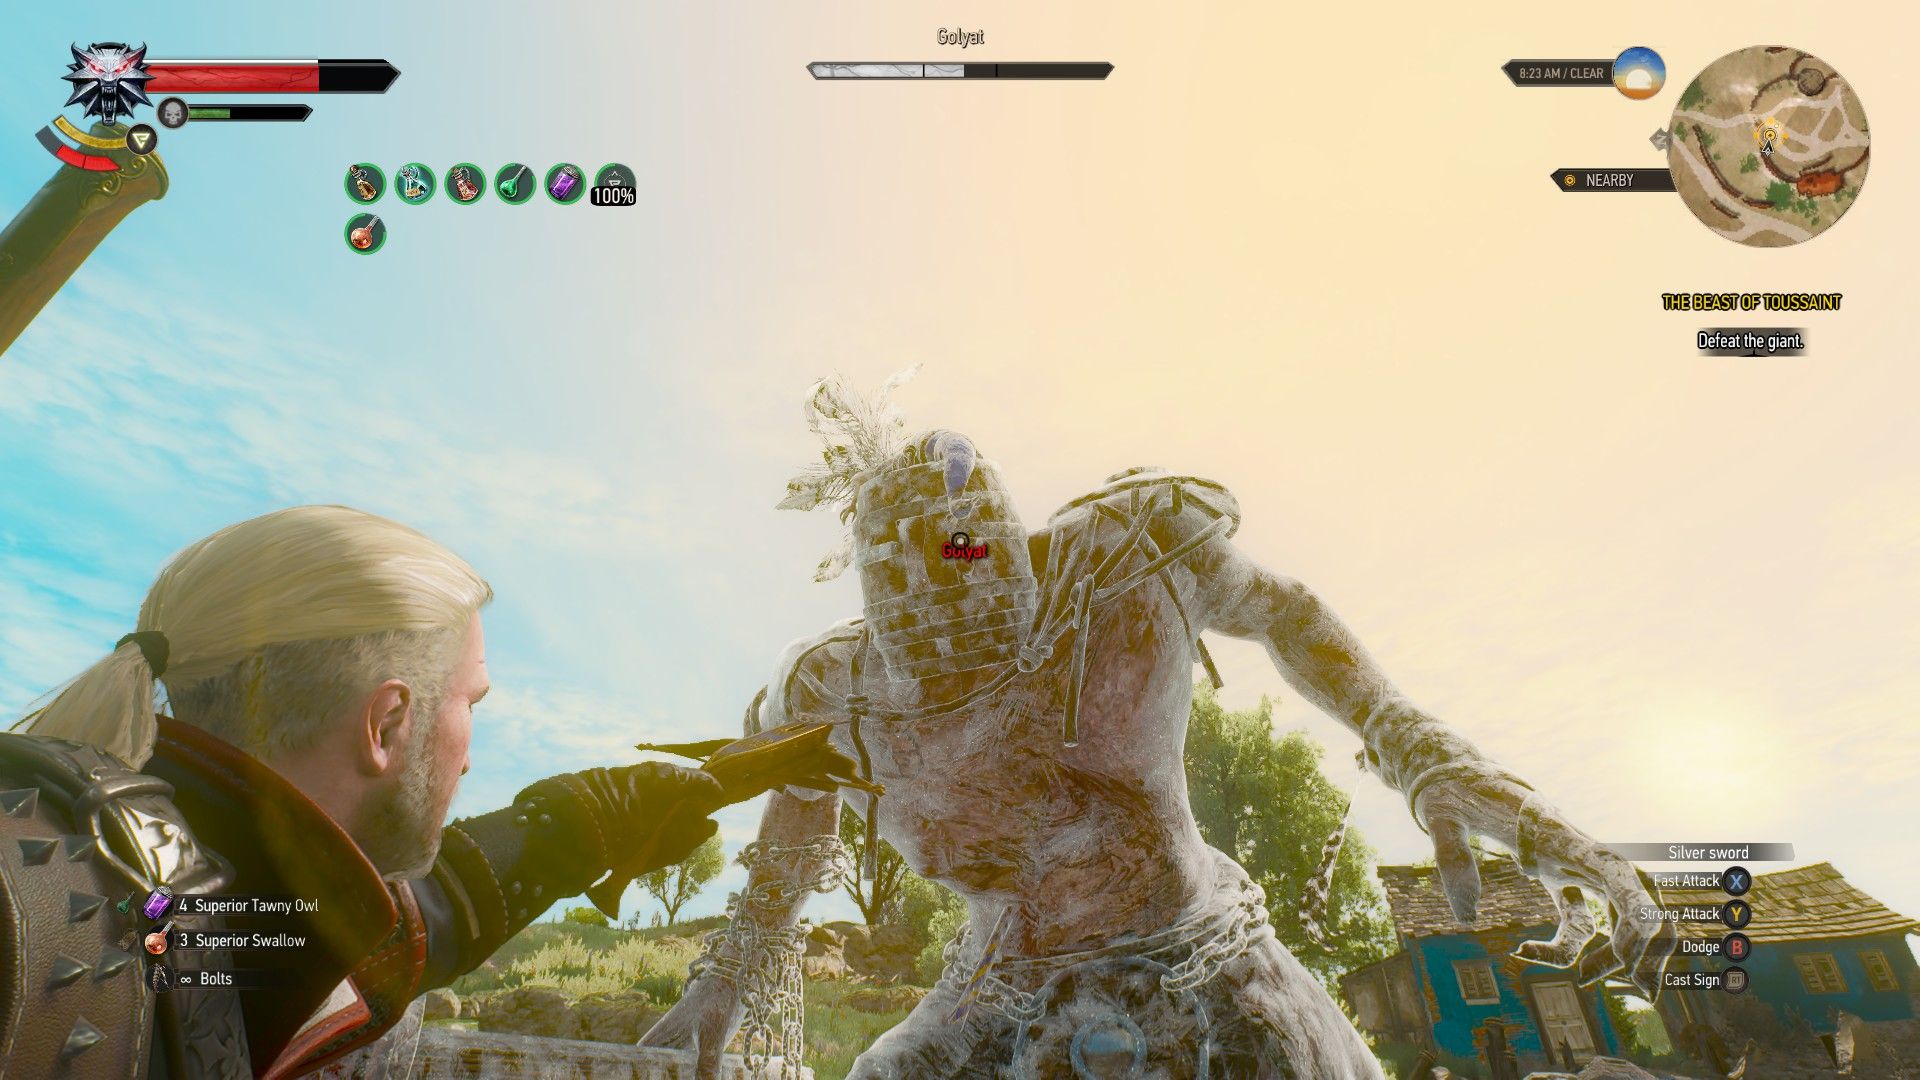 A screenshot of Geralt pointing a crossbow at a giant's head in The Witcher 3.